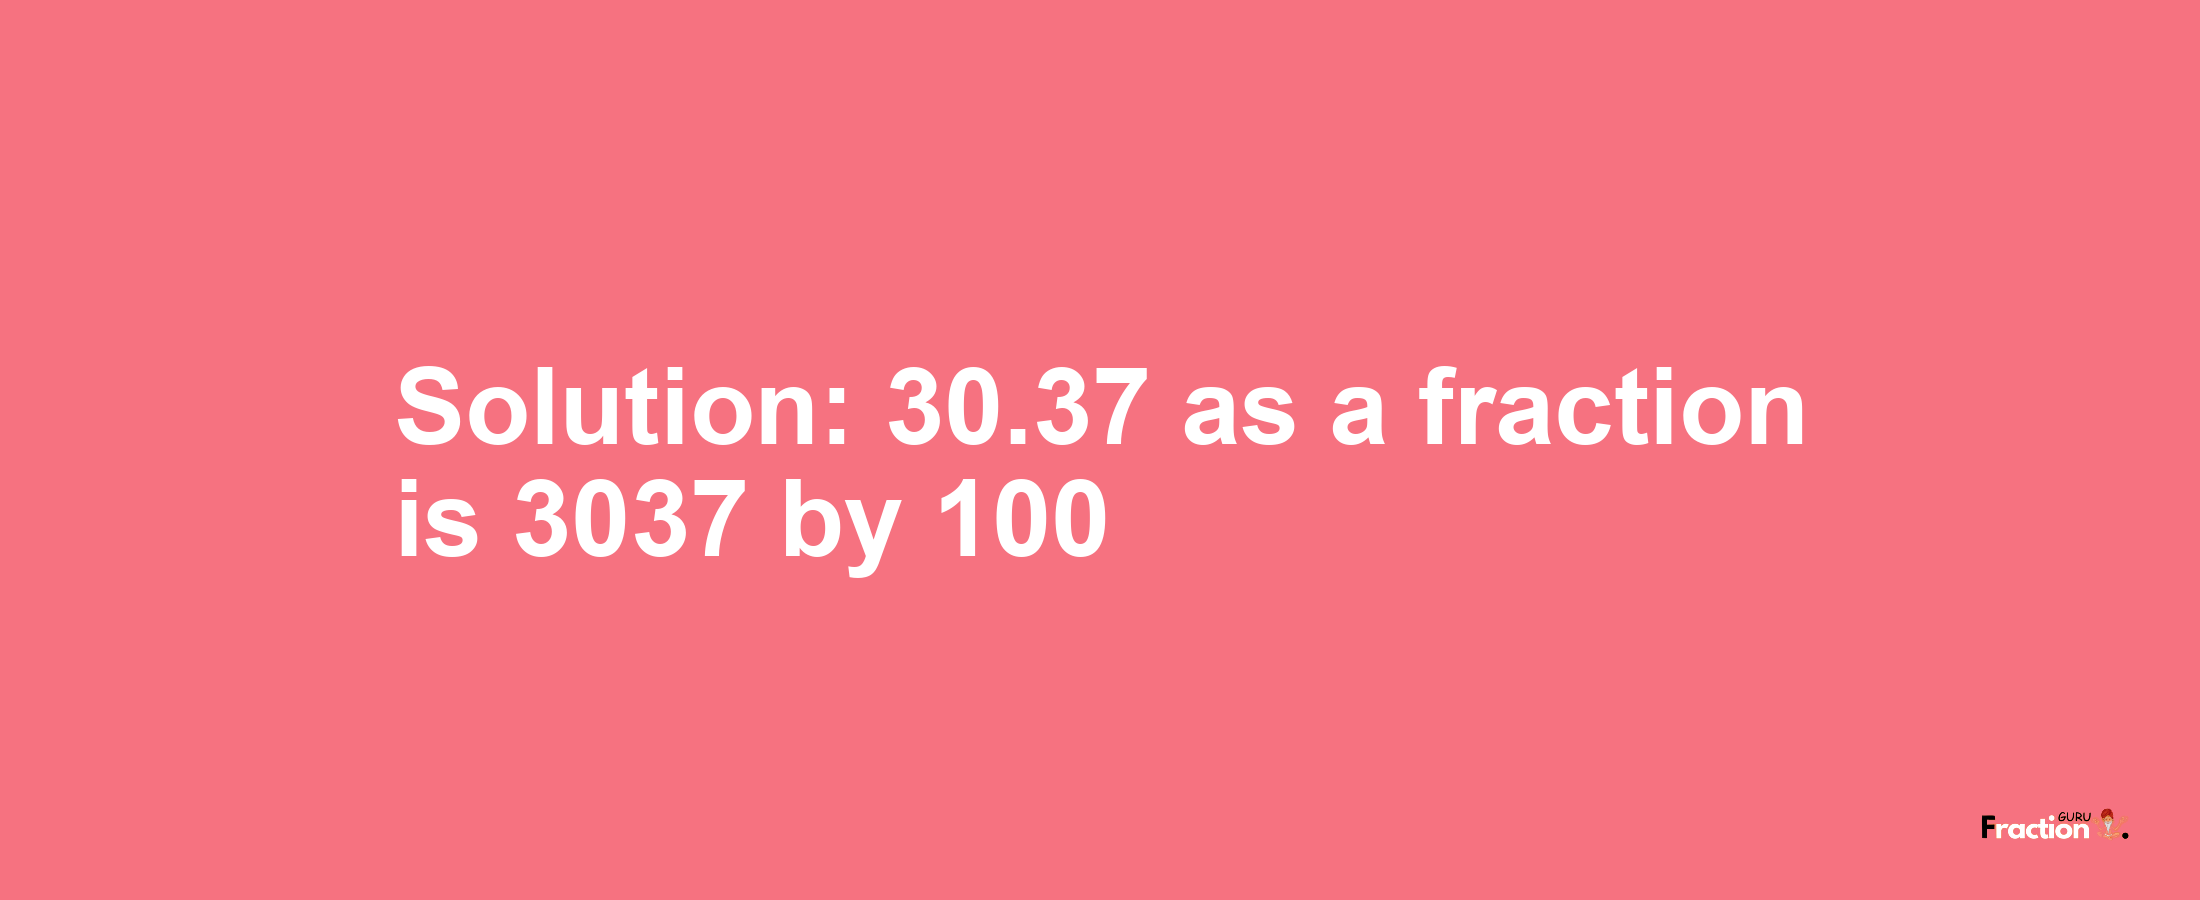 Solution:30.37 as a fraction is 3037/100